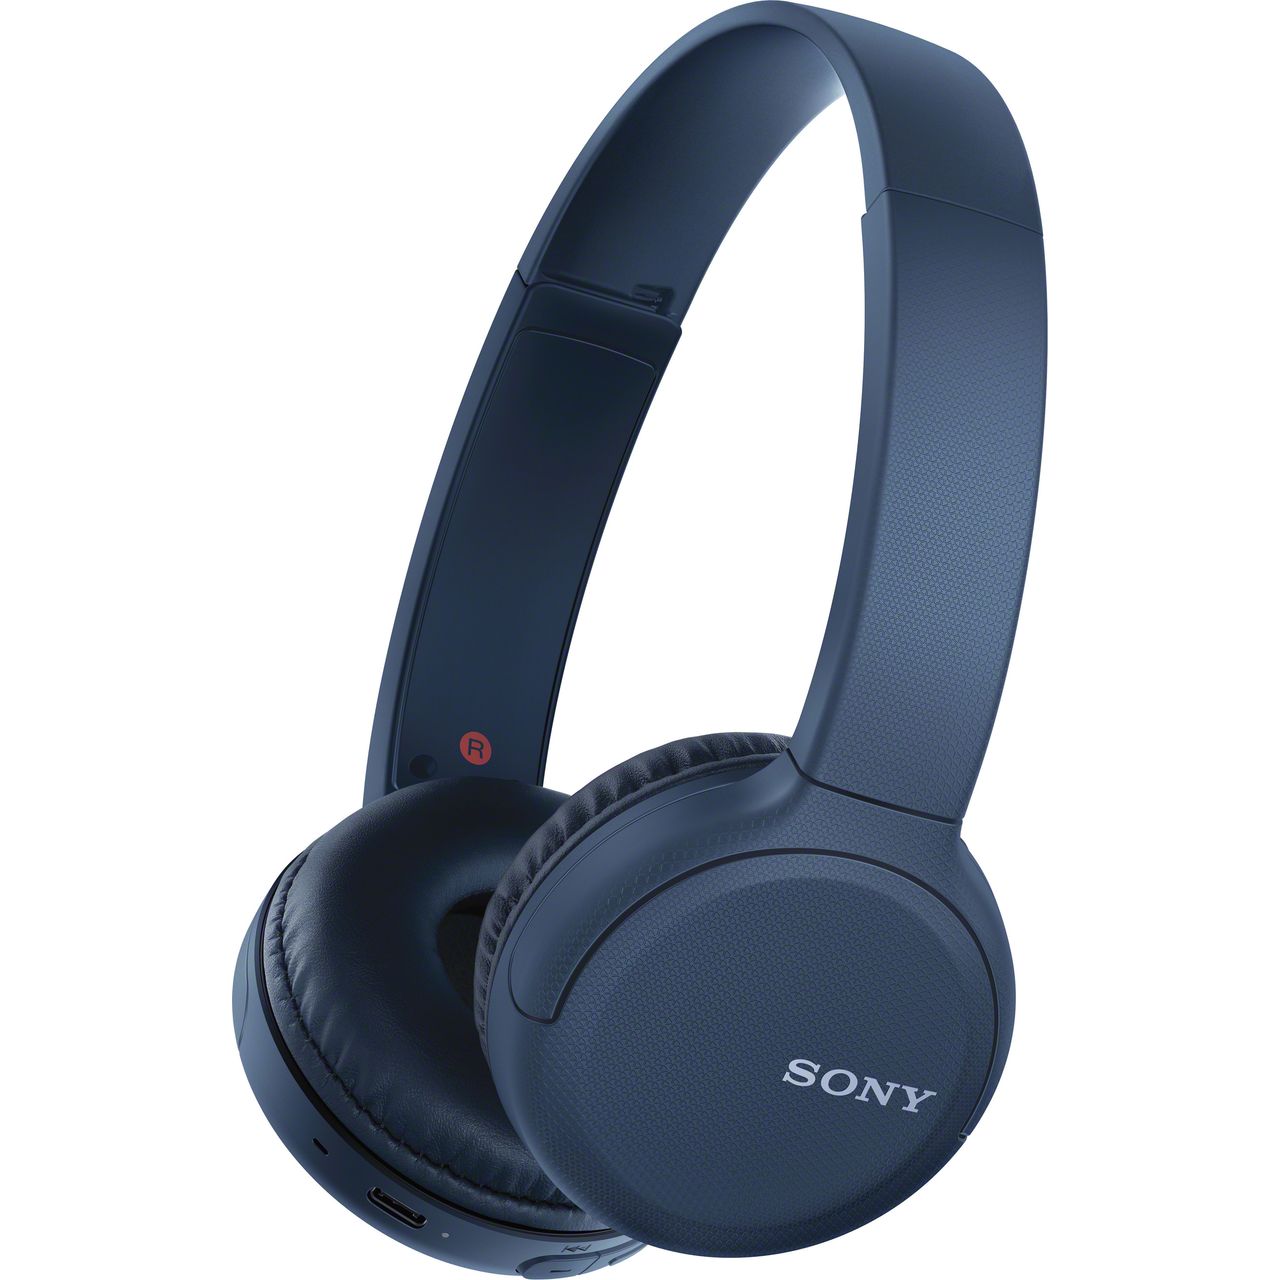 Sony WH-CH510 On-Ear Wireless Bluetooth Headphones Review